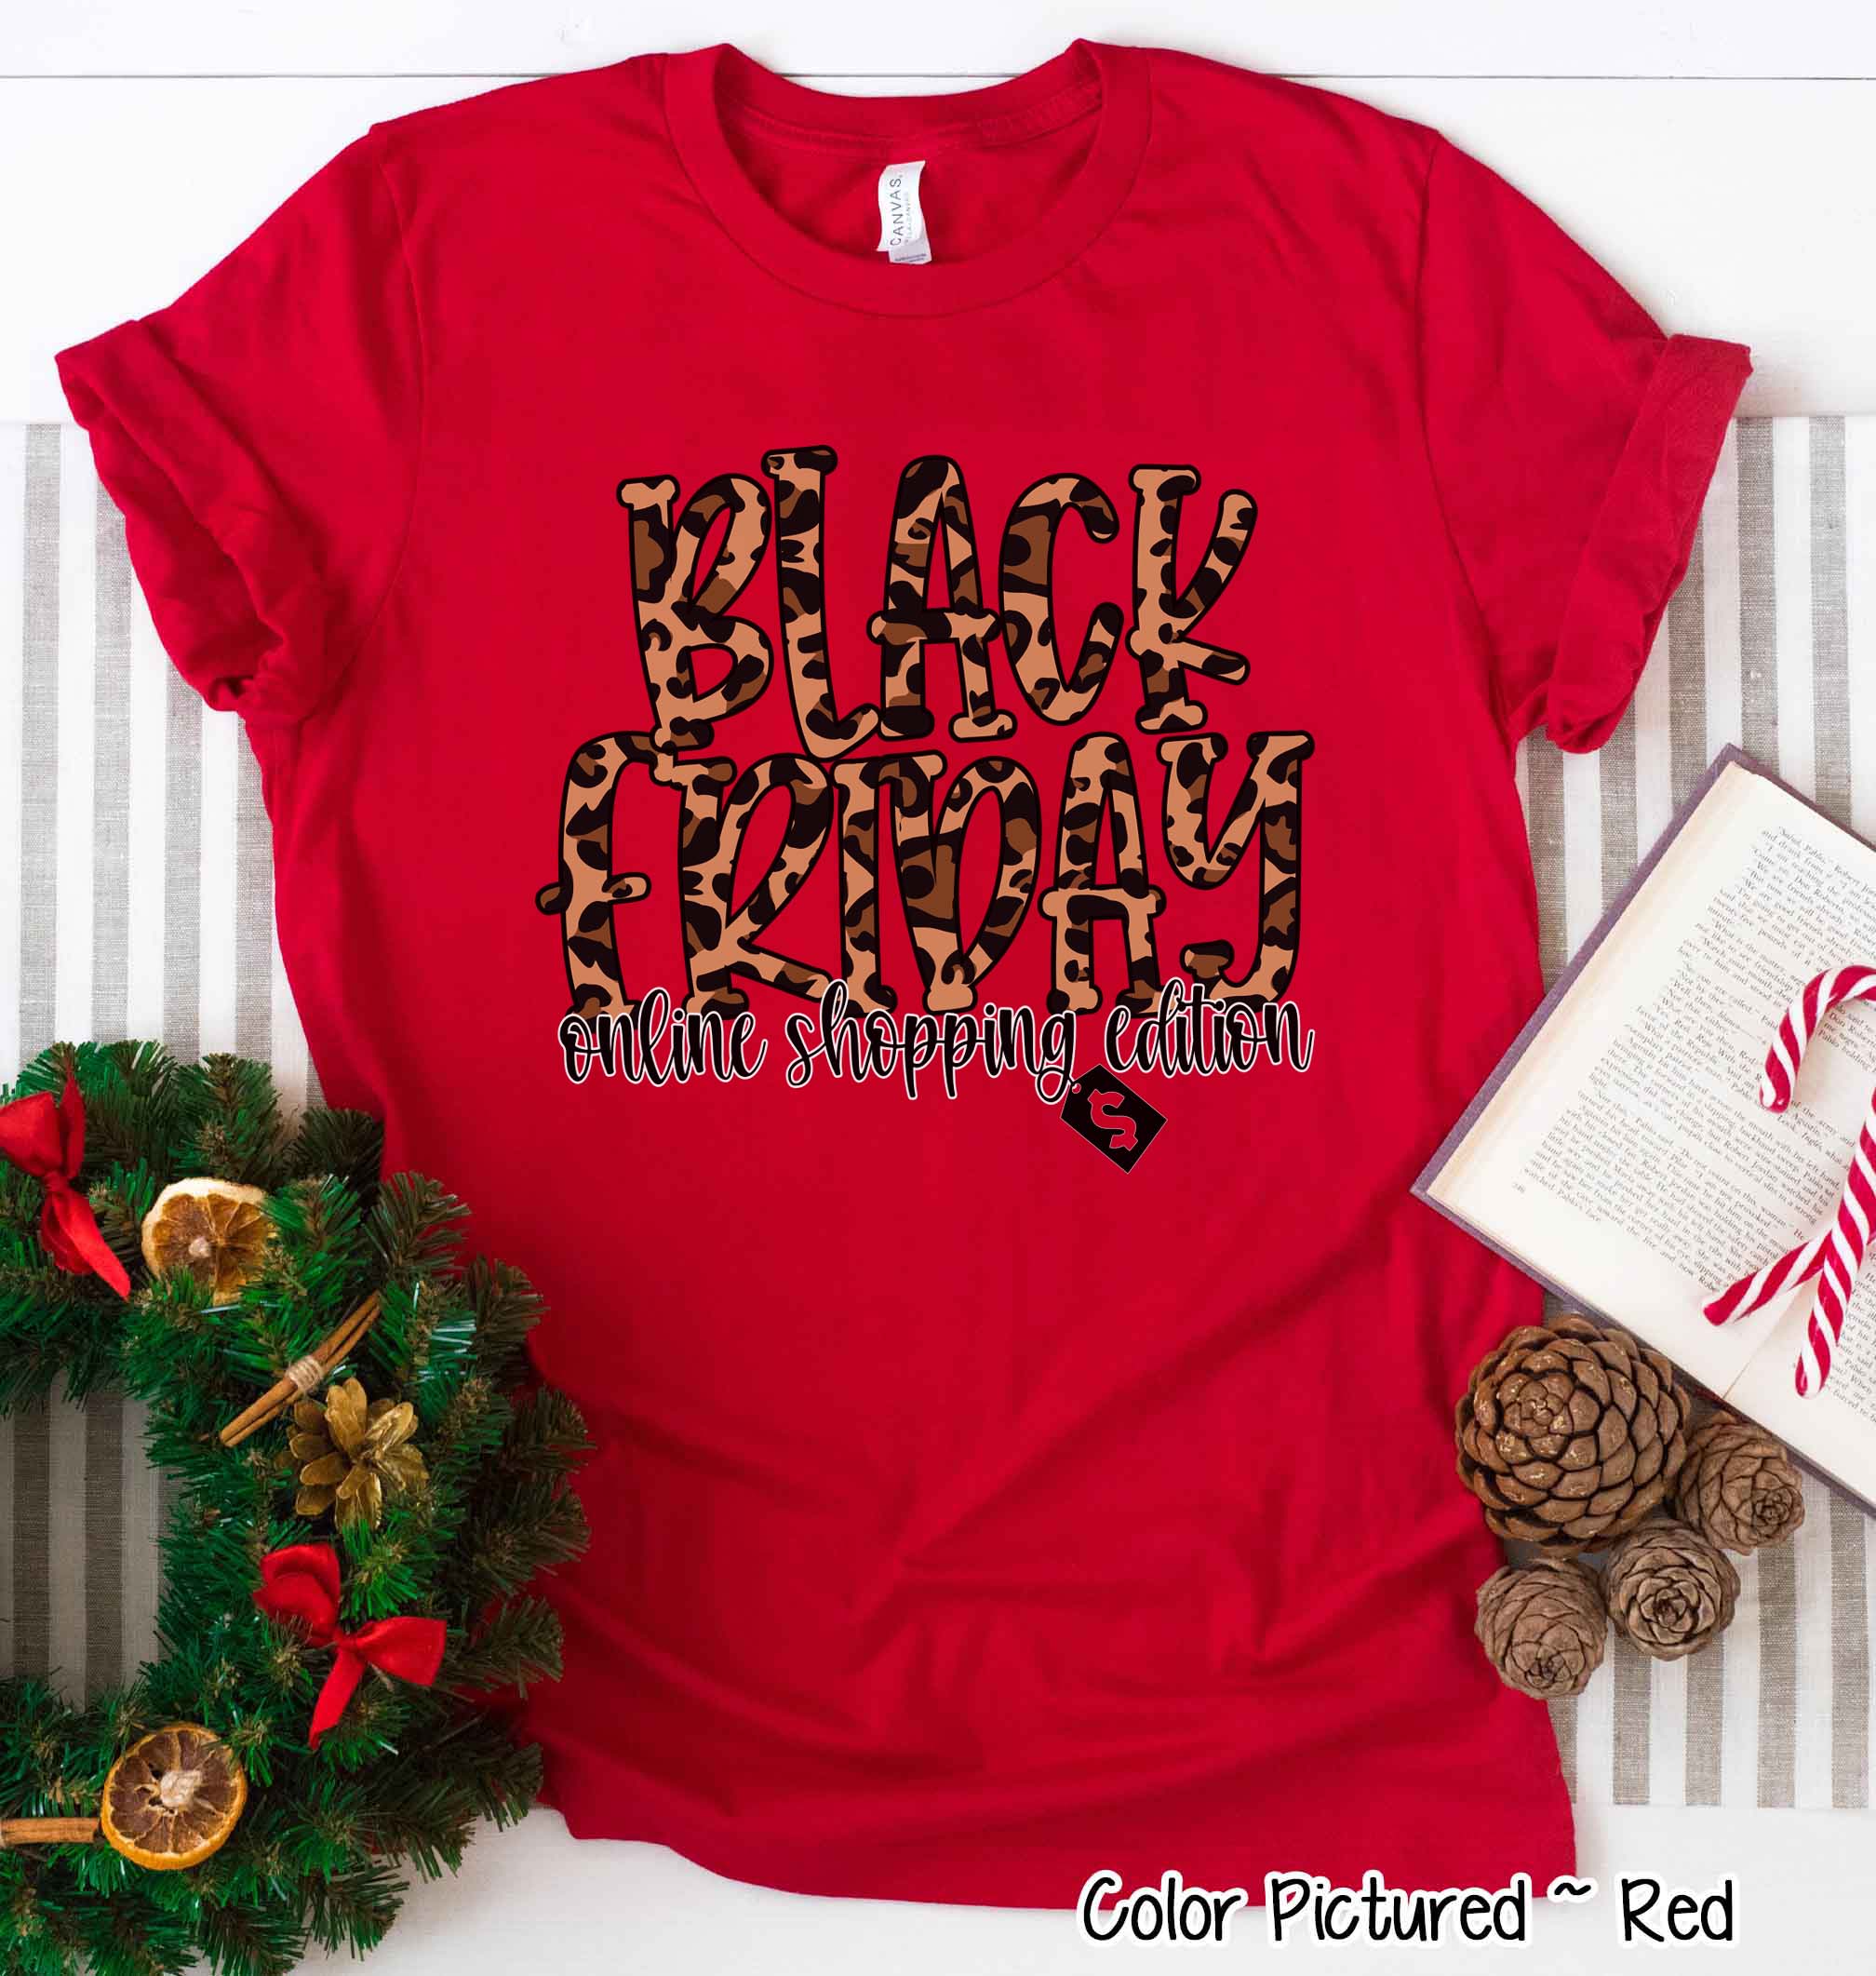 Black Friday Online Shoping Edition Holiday Tee